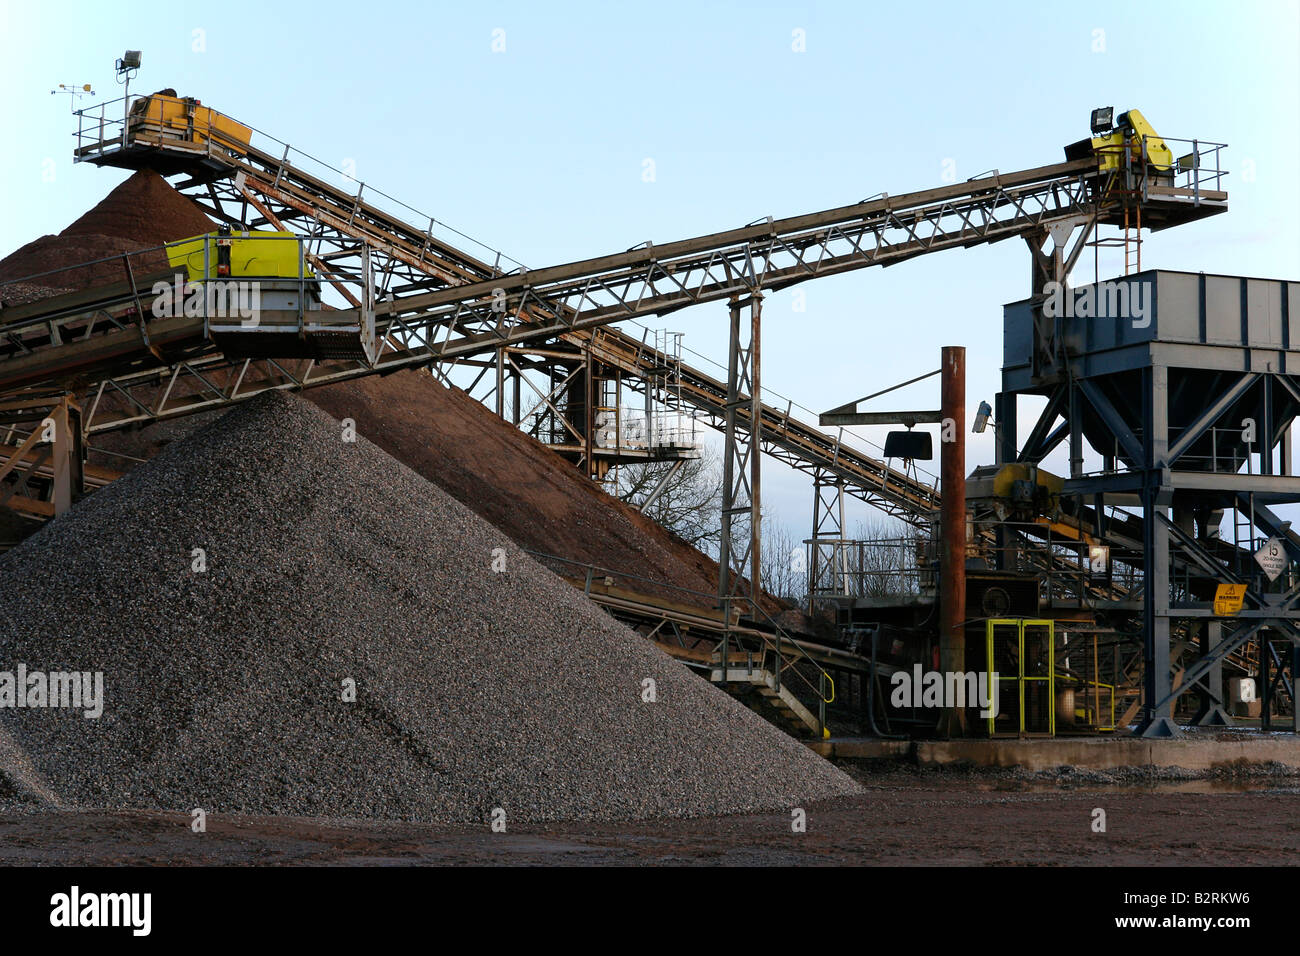 A gravel sorting industrial site Stock Photo